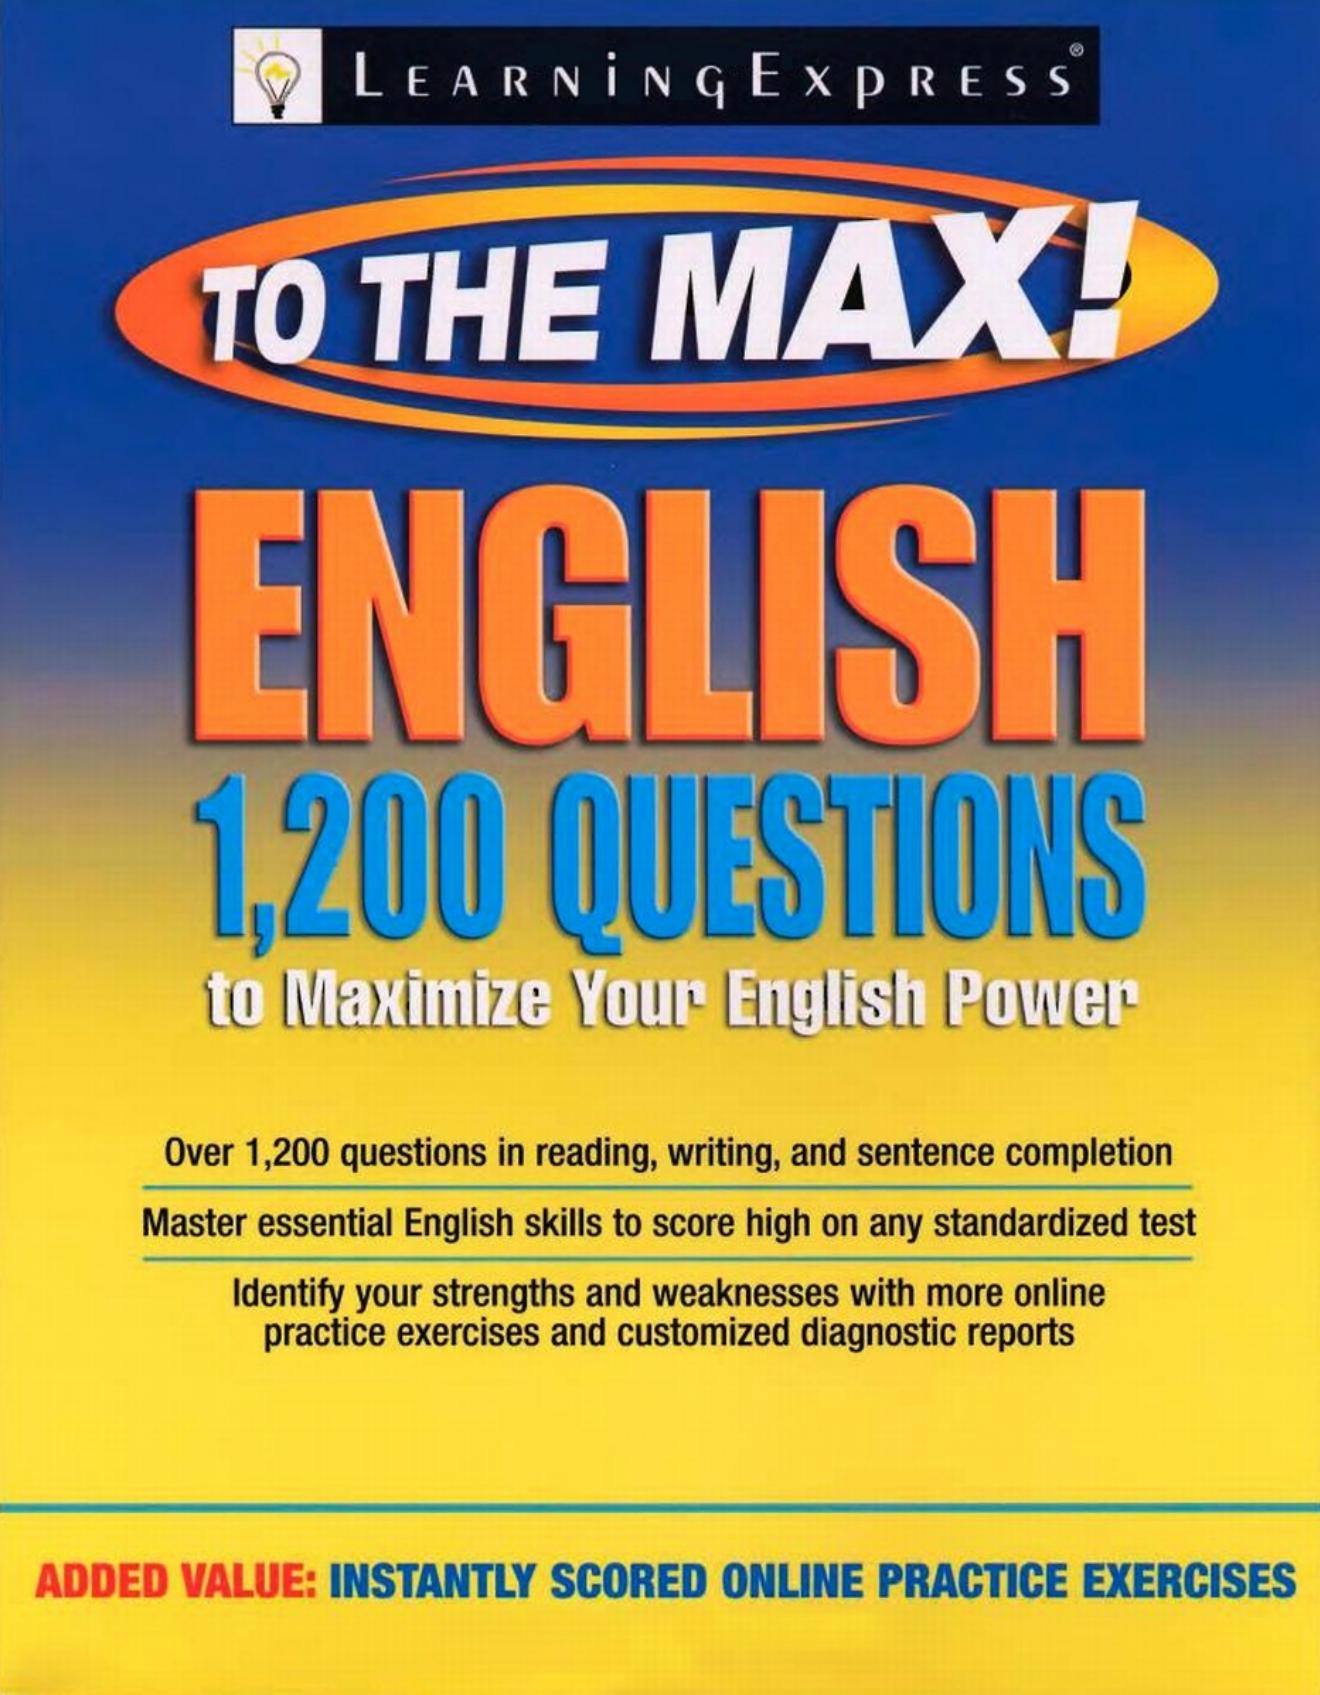 English to the Max: 1,200 Practice Questions to Maximize Your English Power